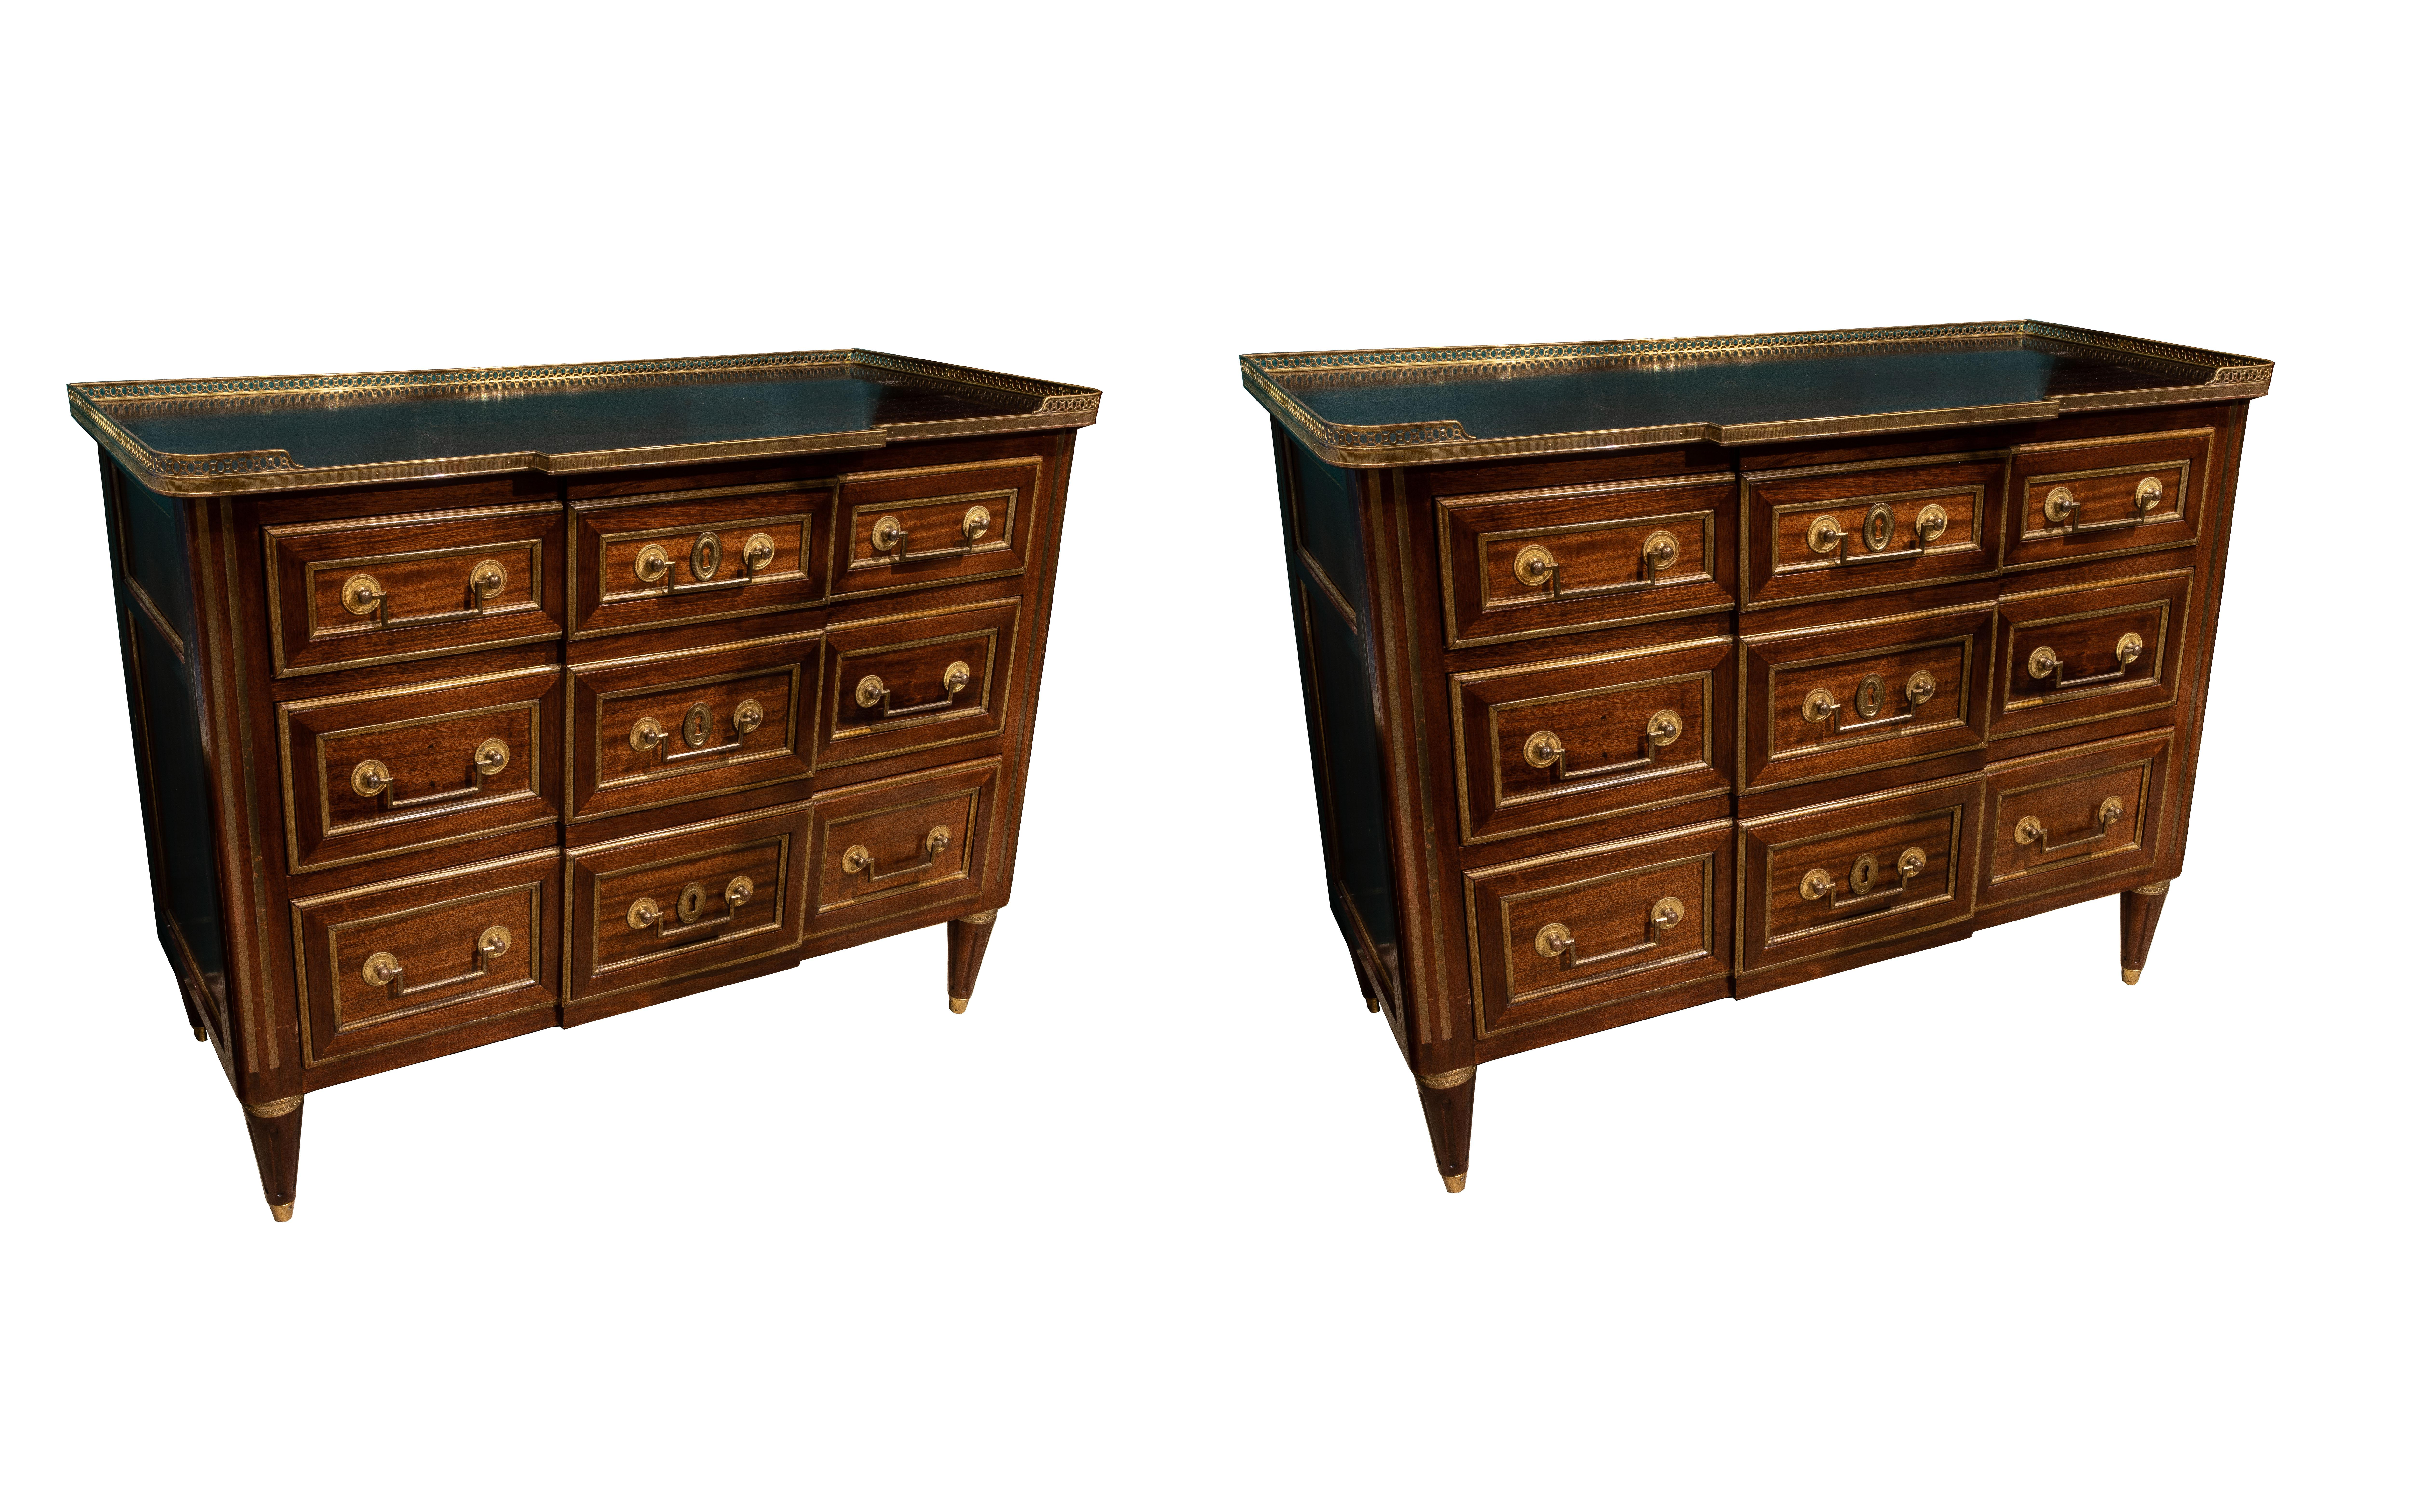 Pair of Louis XVI style or Russian style brass inlay commodes. Very nice brass gallery top.